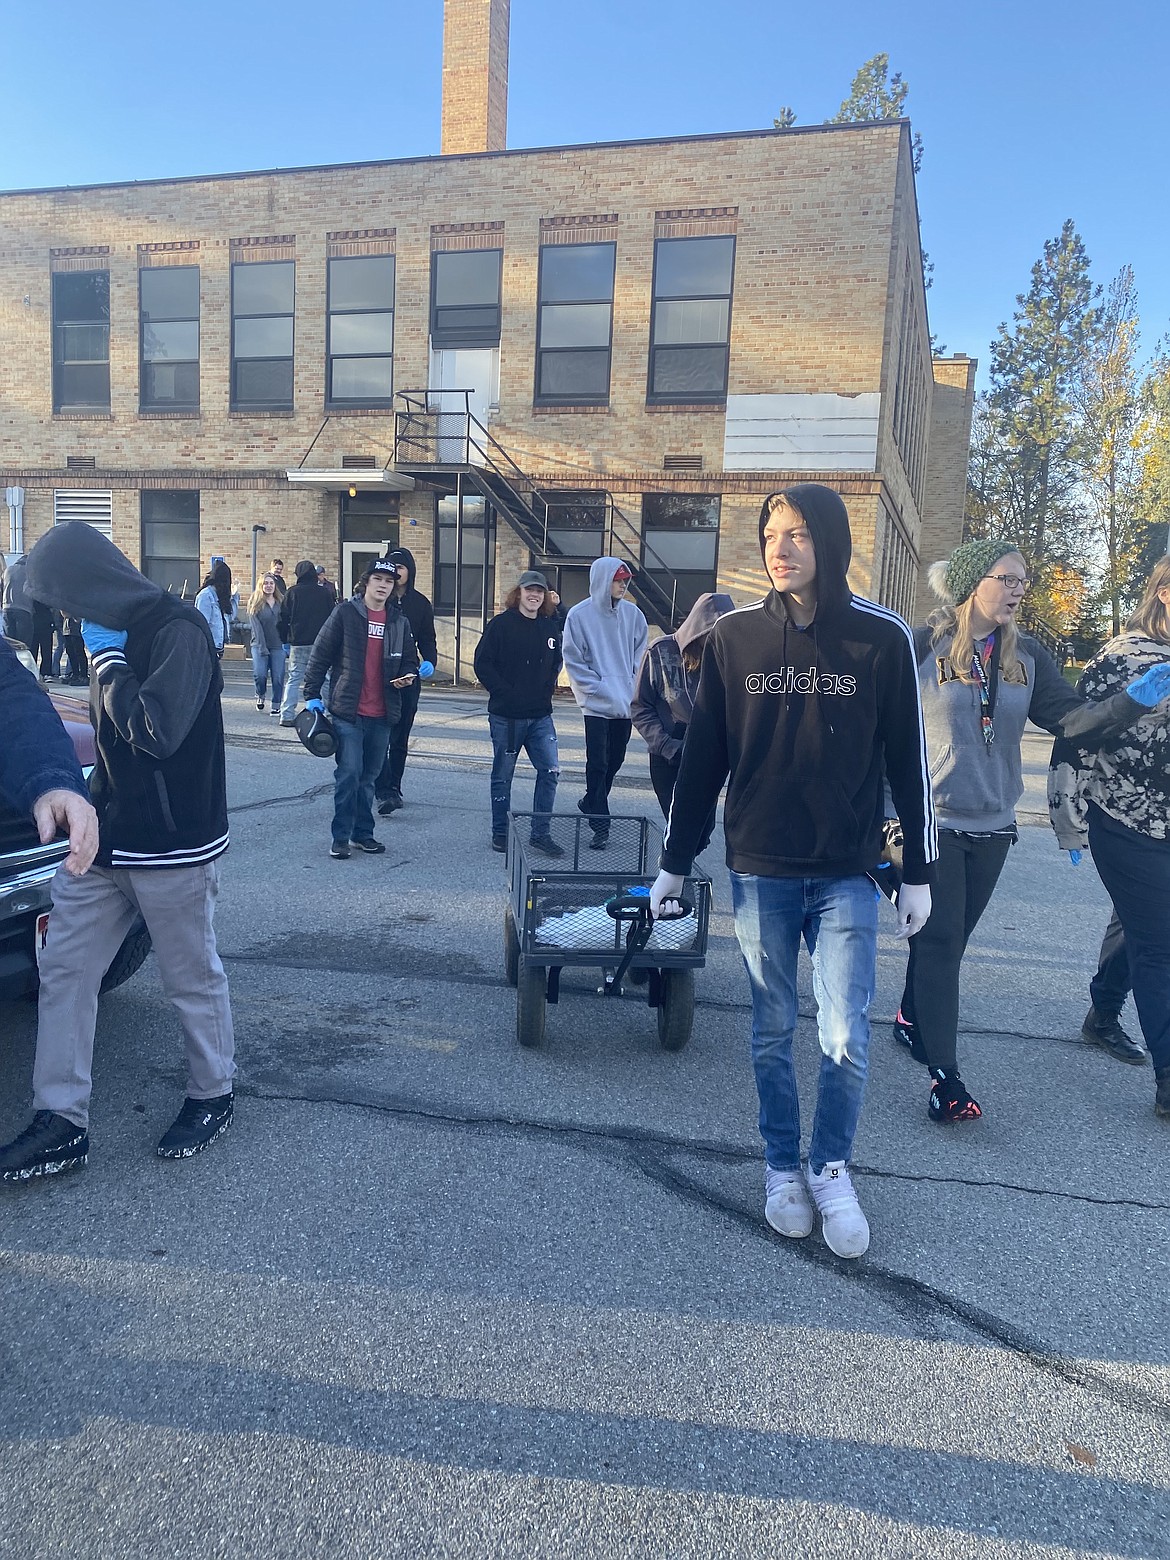 The entire Mountain View High School student body set off Wednesday to help with a Main Street clean-up project initiated by eleventh grader, Michael Whitt.